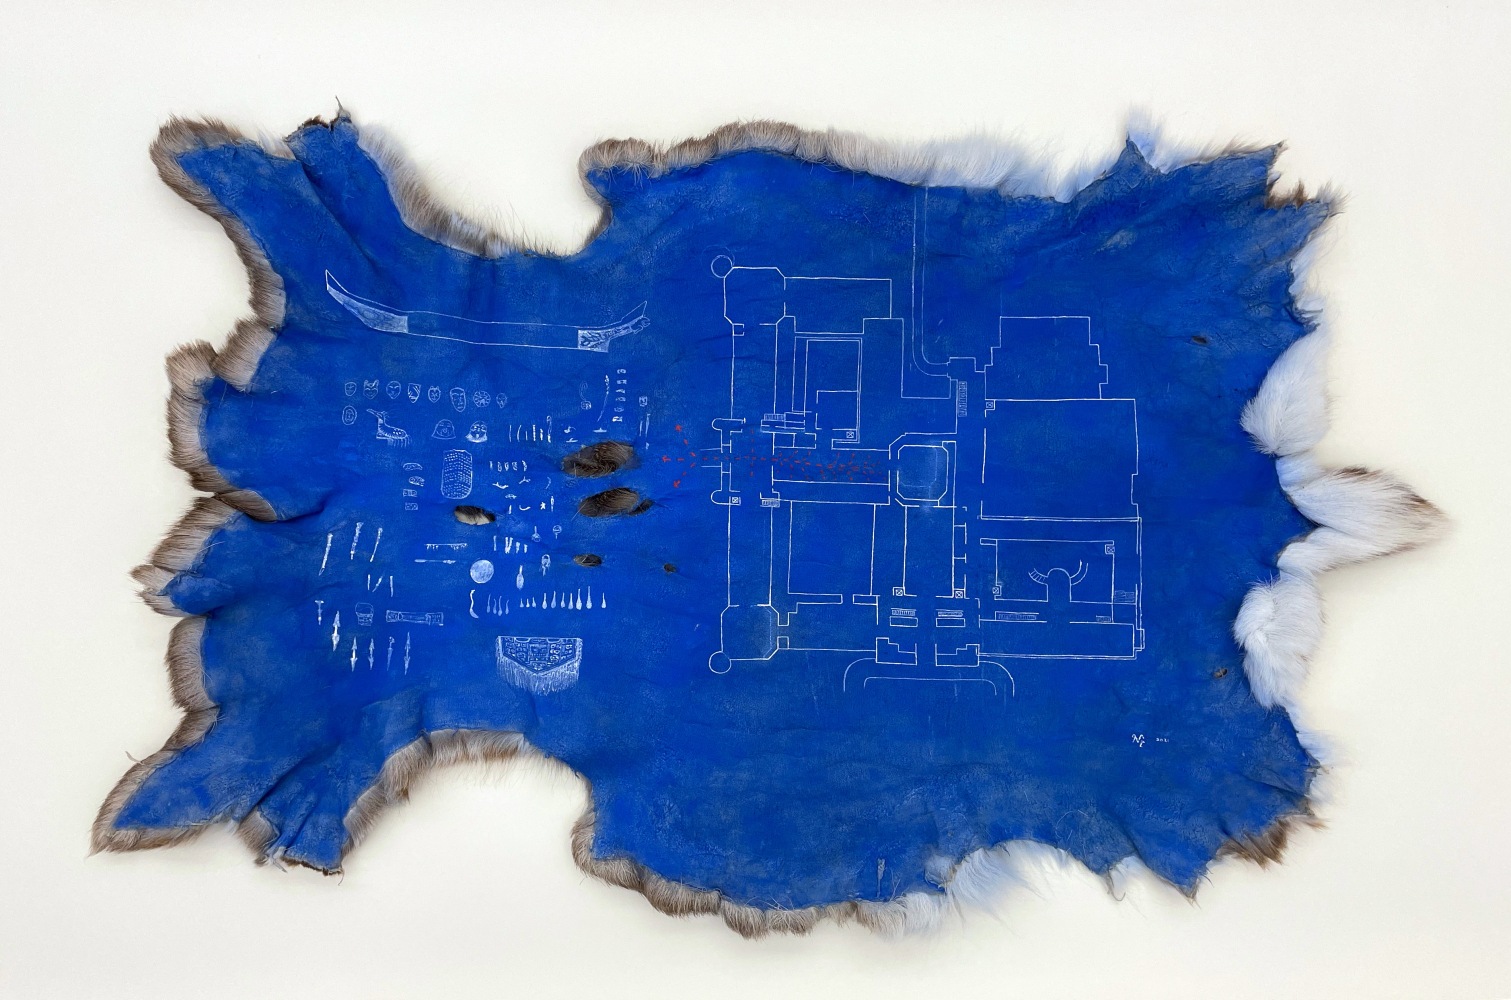 
Nicholas Galanin
Architecture of return, escape (American Museum of Natural History), 2021
pigment and acrylic on deer hide
32 x 61 inches (81.3 x 154.9 cm)
(NGA21-15)